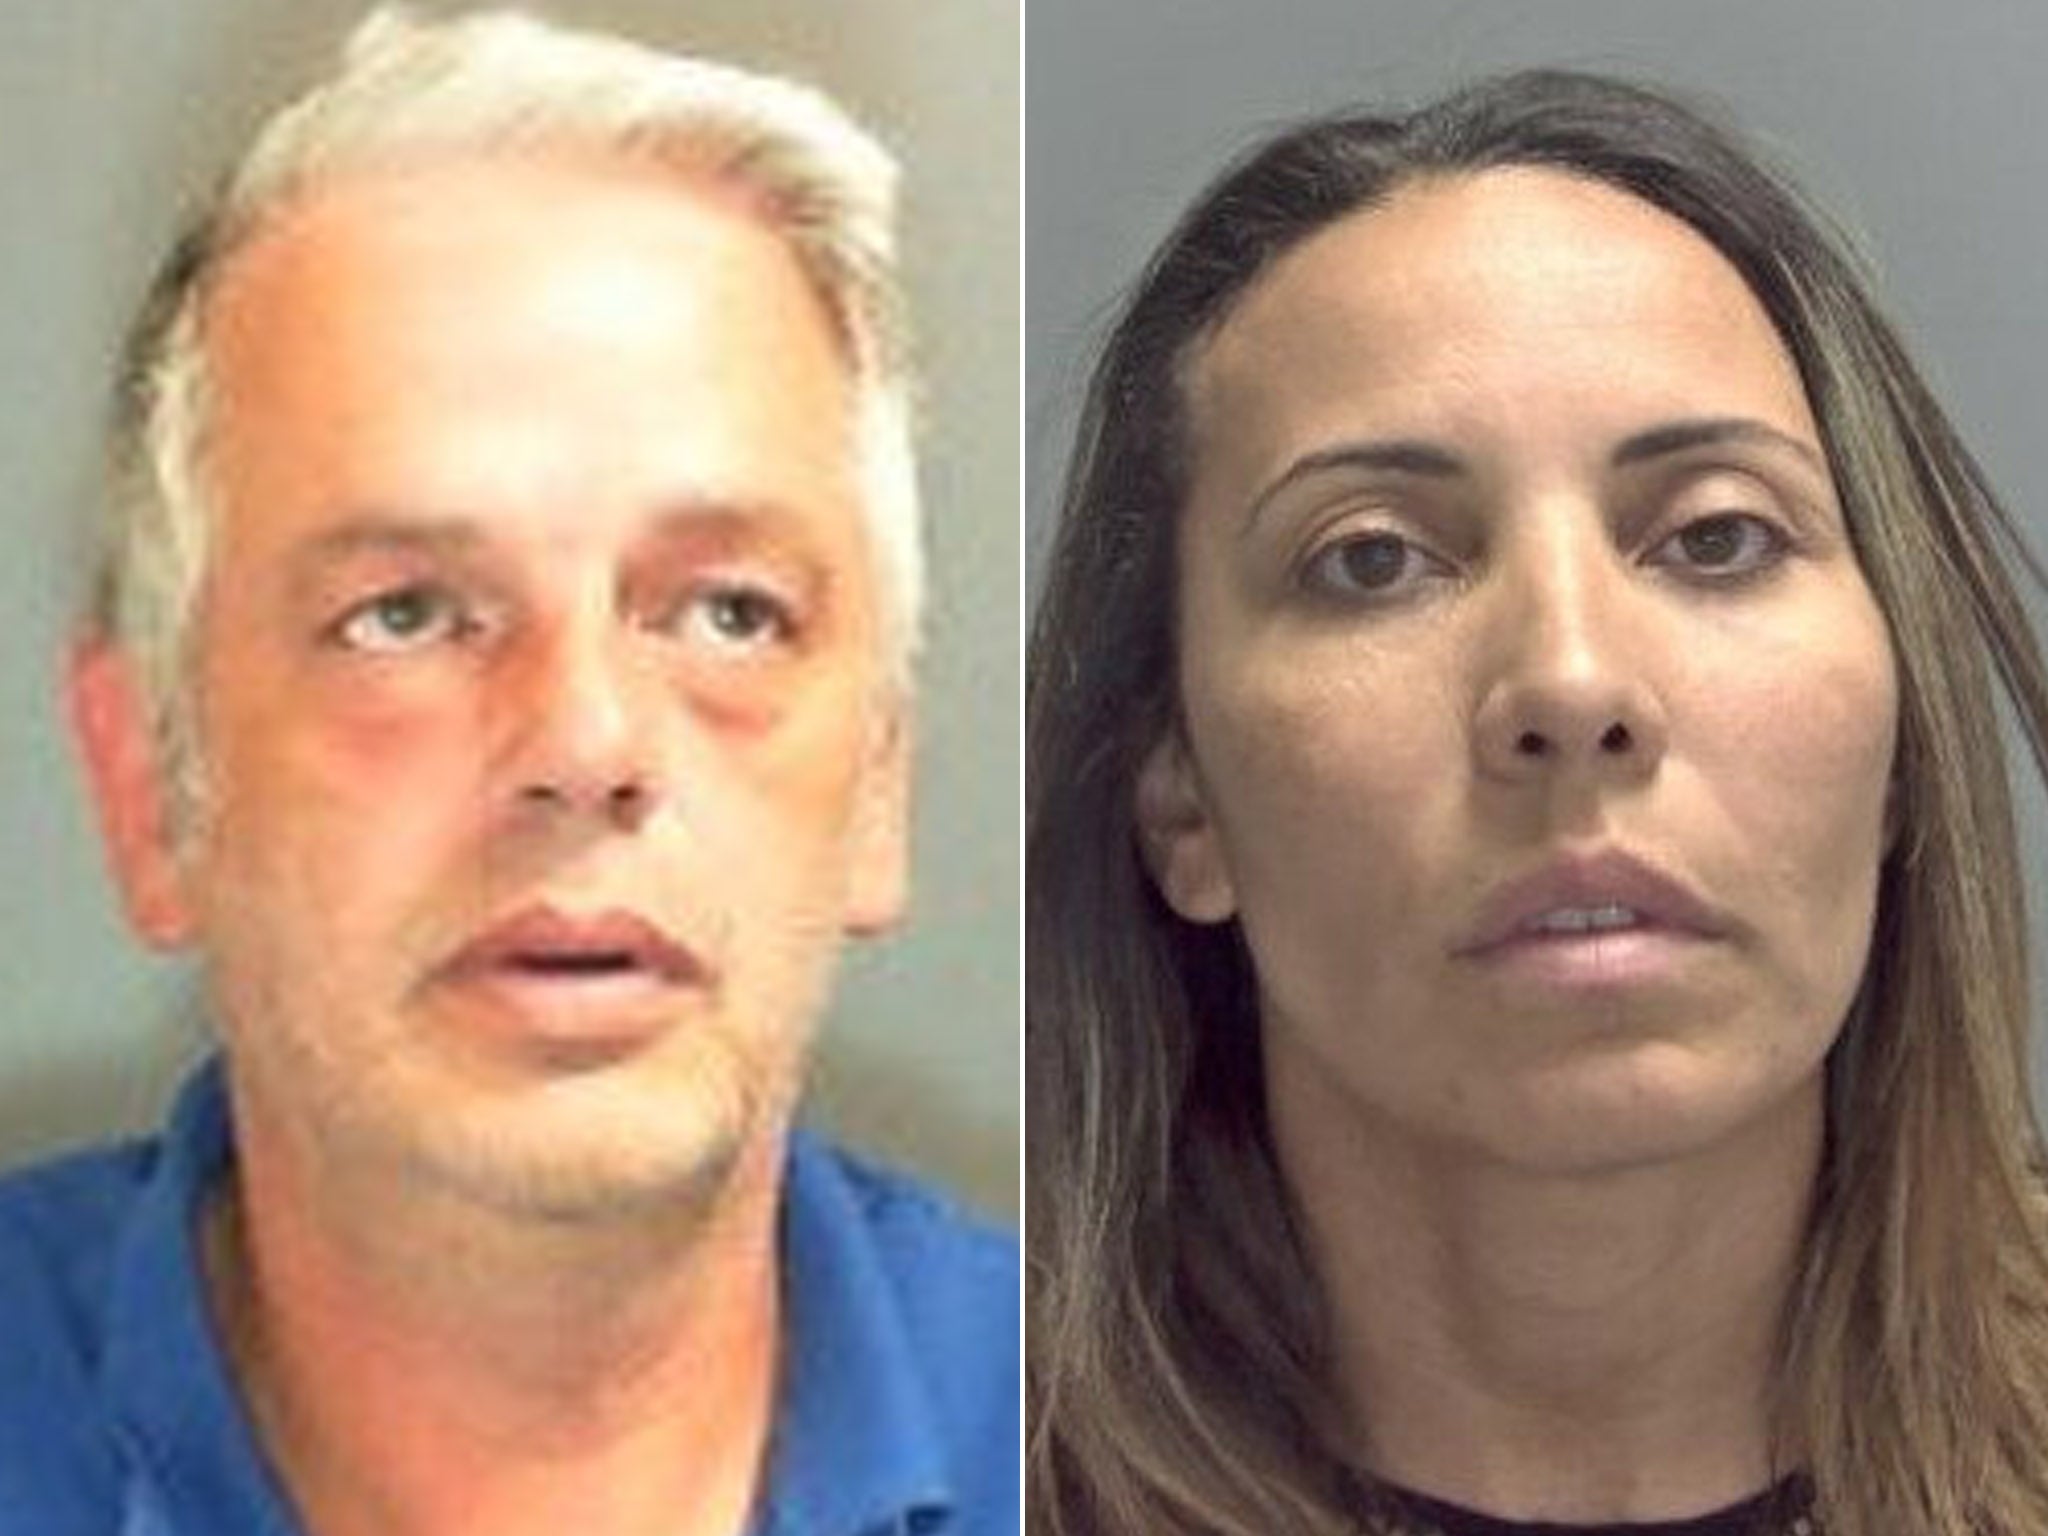 Husband and wife who ran brothel jailed for sex trafficking The Independent hq nude pic